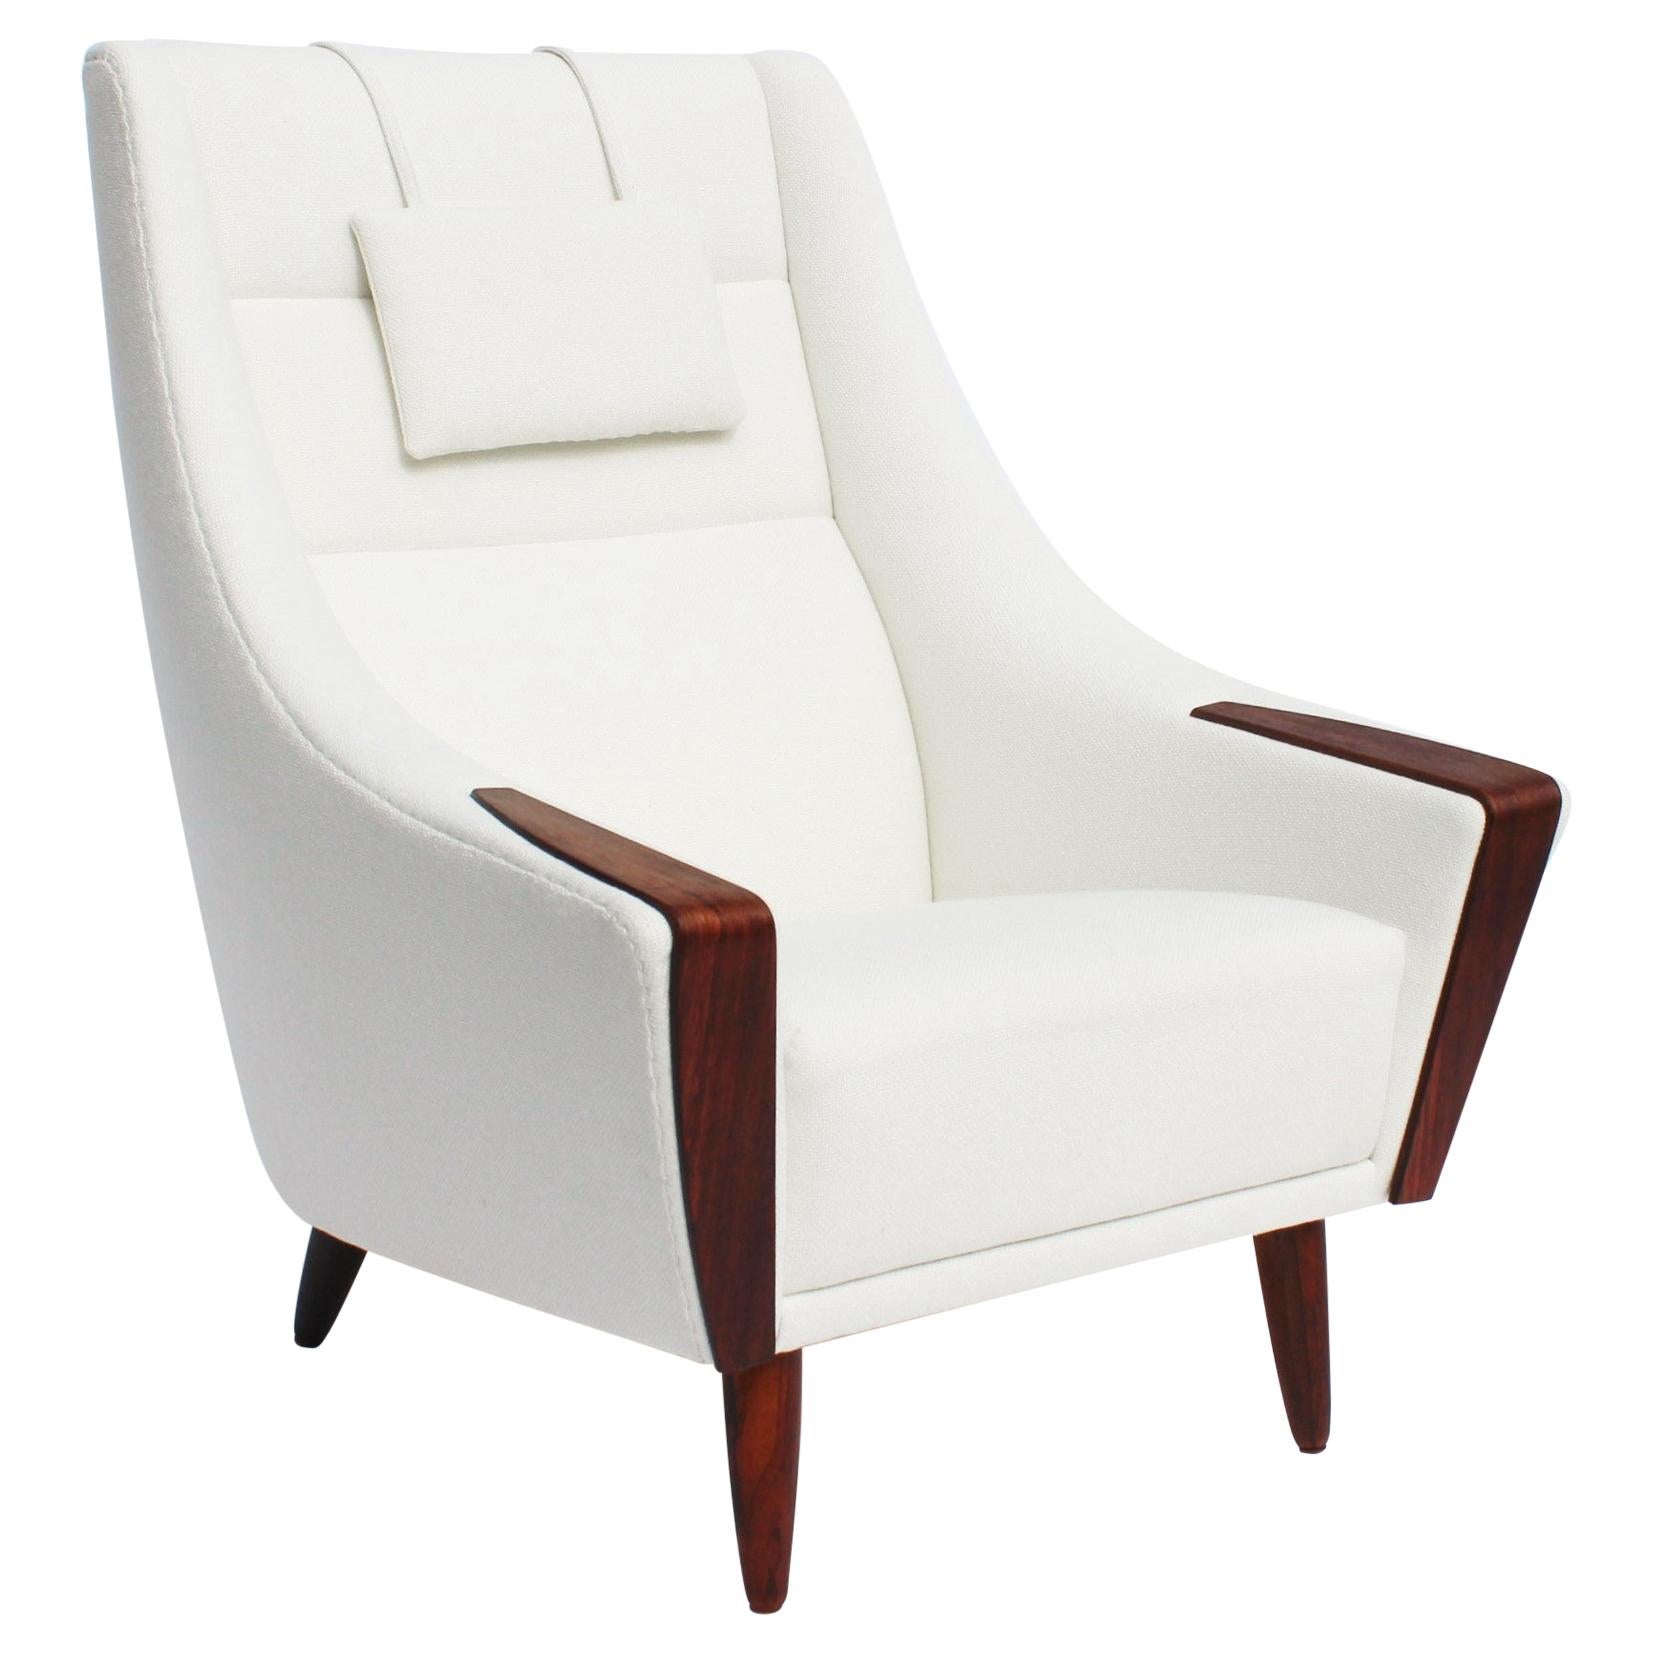 Easy Chair with Tall Back Upholstered in White Fabric, Danish Design, 1960s